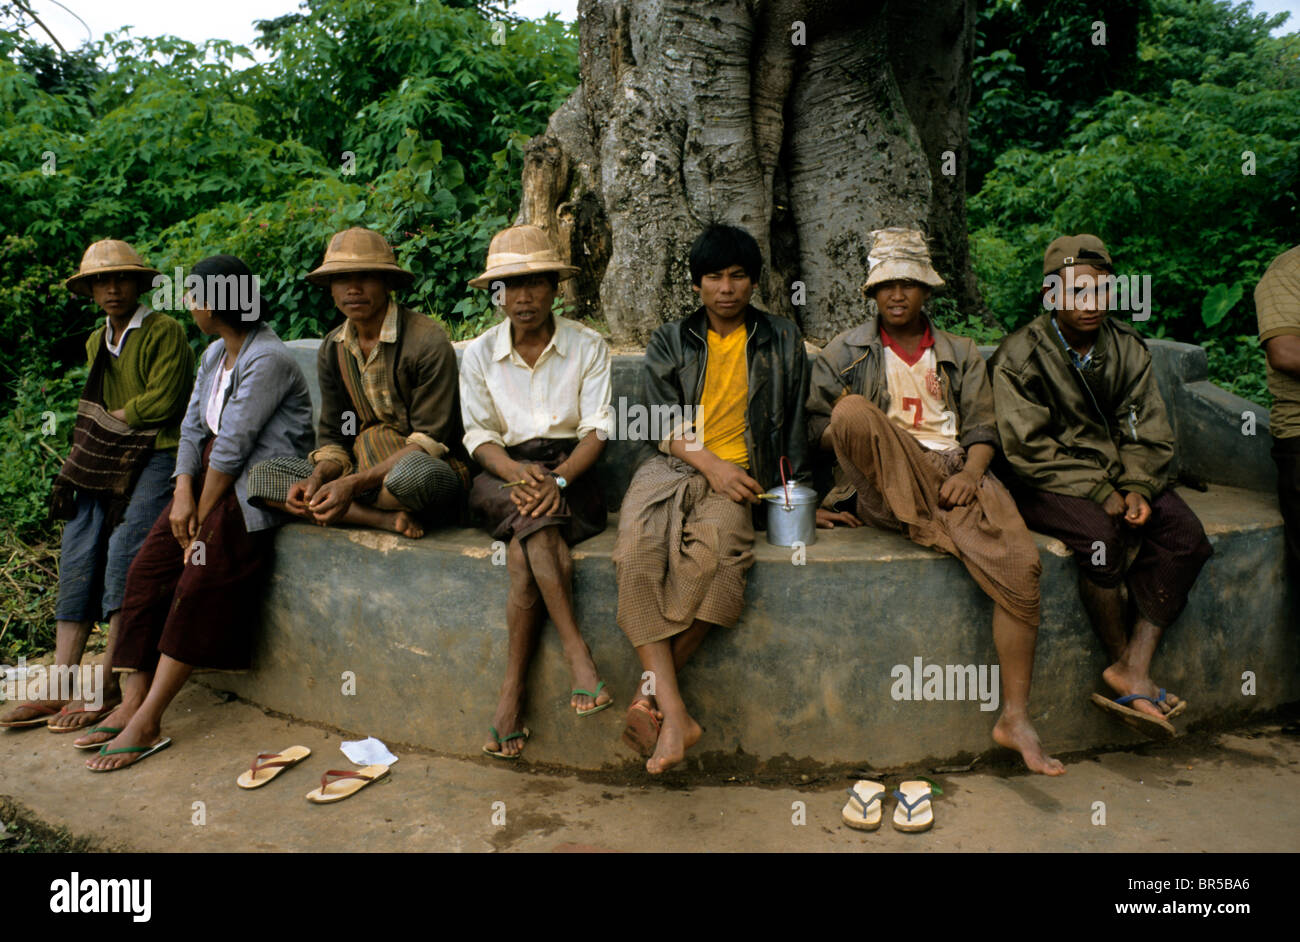 Day-workers waiting for work, Burma, Myanmar, Asia Stock Photo